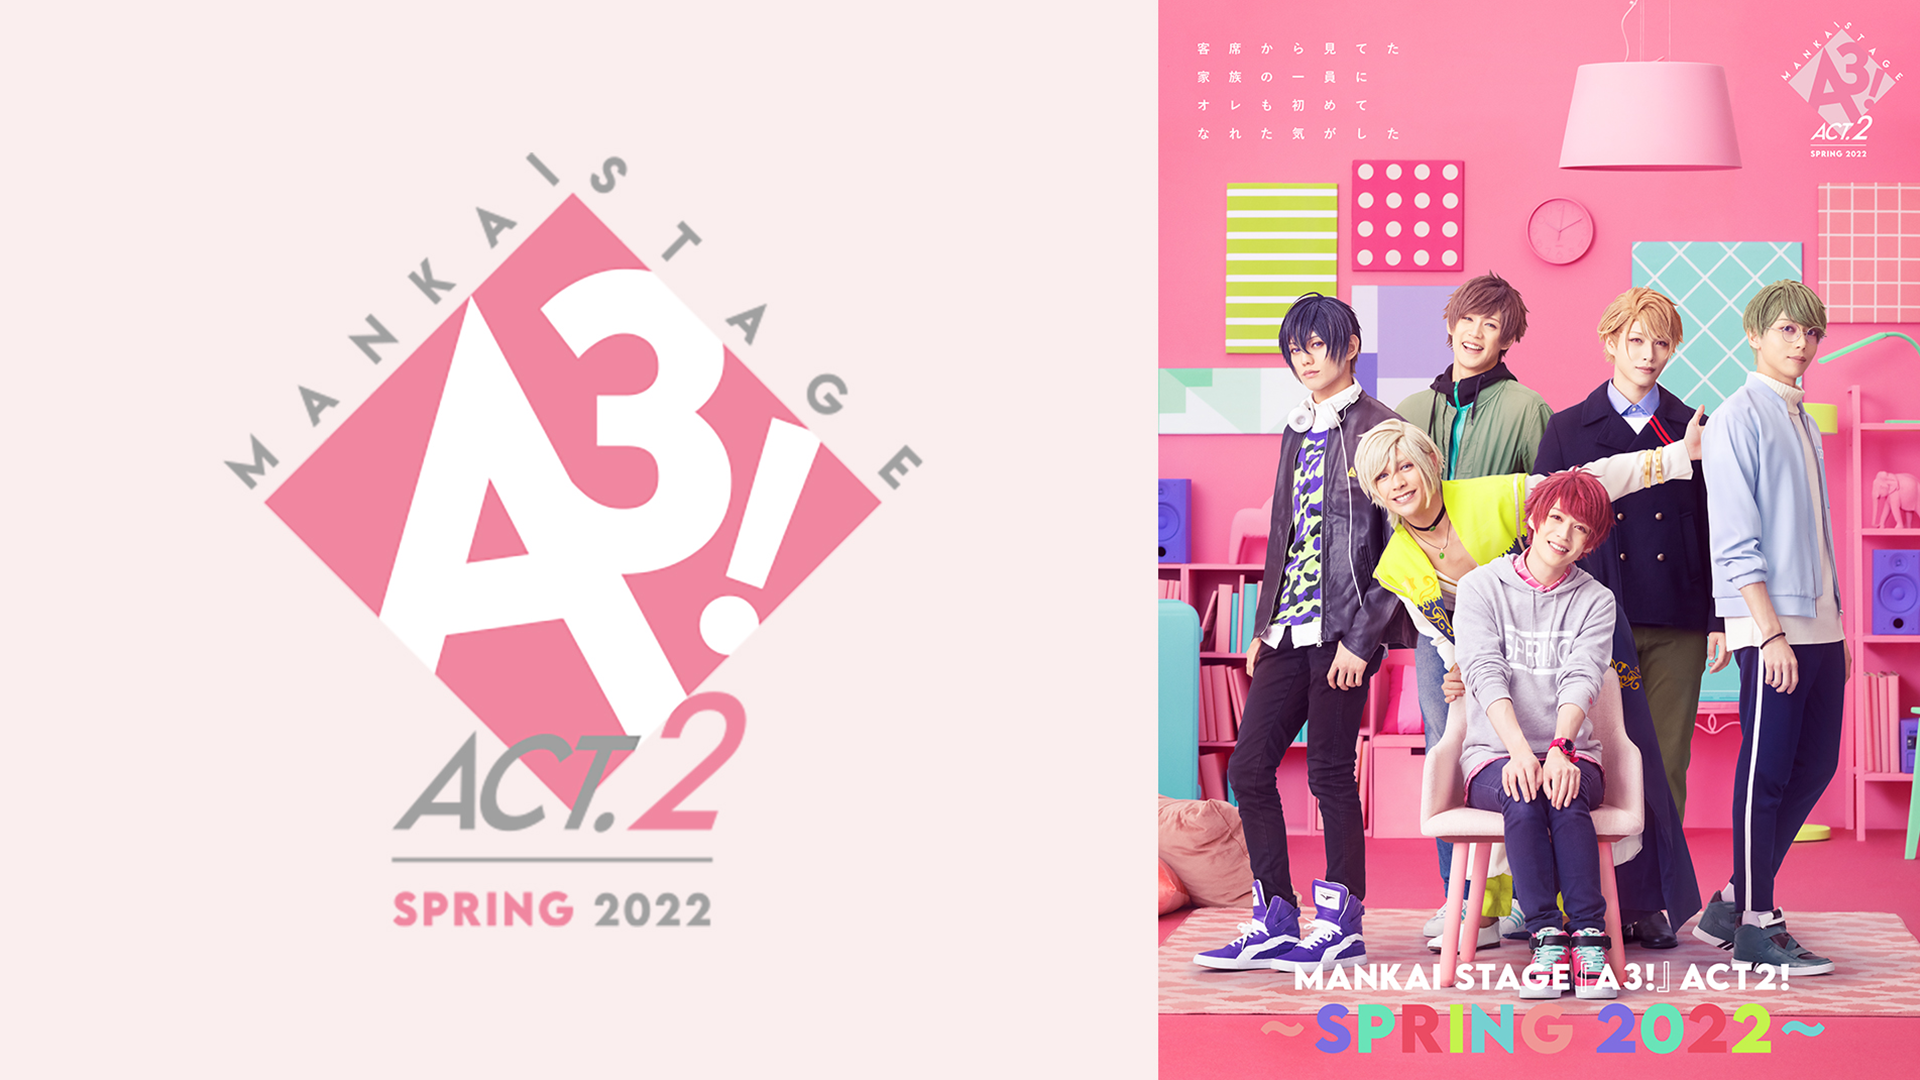 MANKAI STAGE『A3!』ACT2! ～SPRING 2022～(アニメ / 2022) - 動画配信 